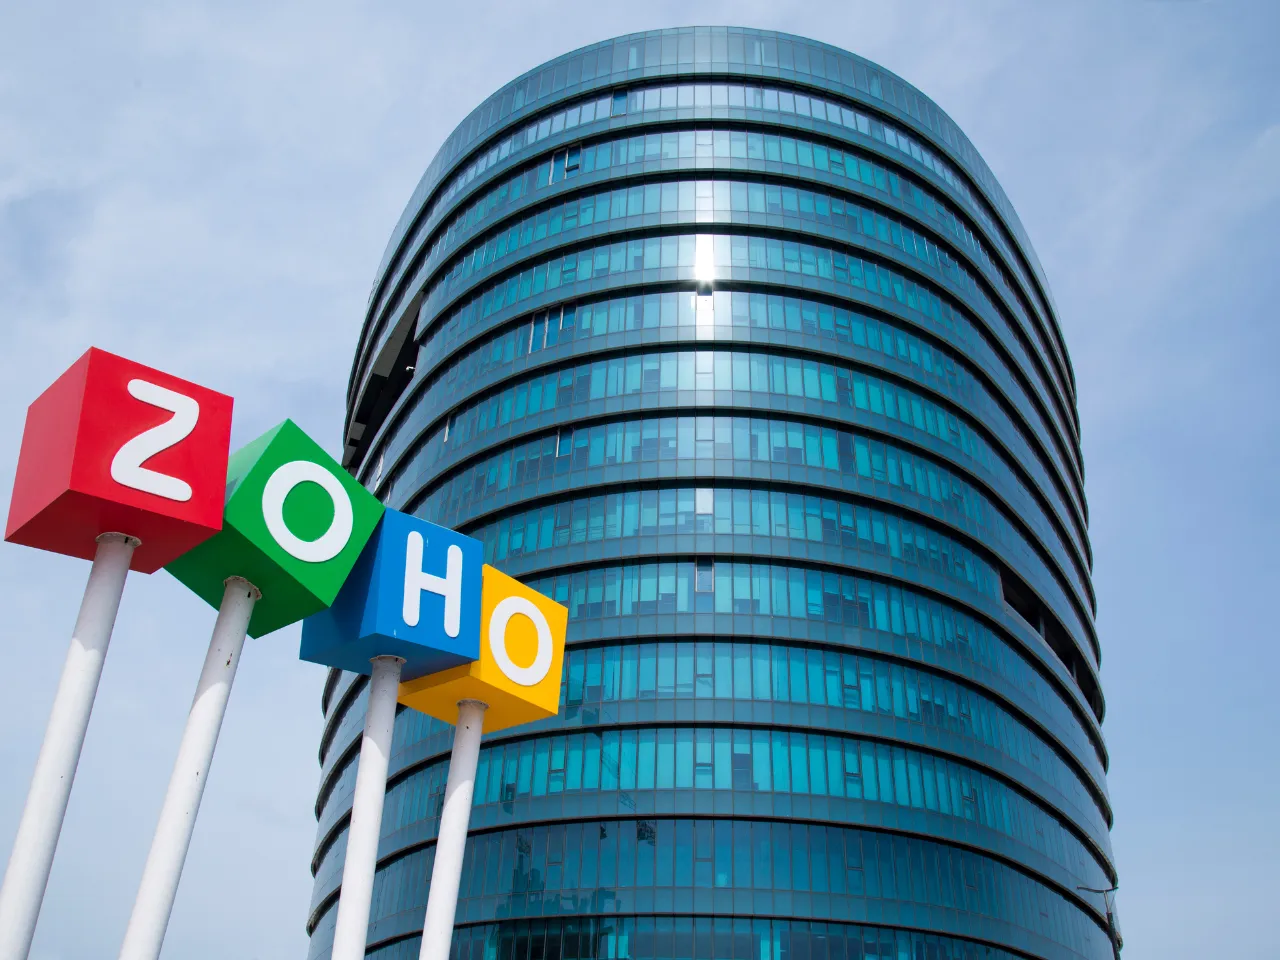 Zoho building its own AI model to takes on industry leader OpenAI and Google